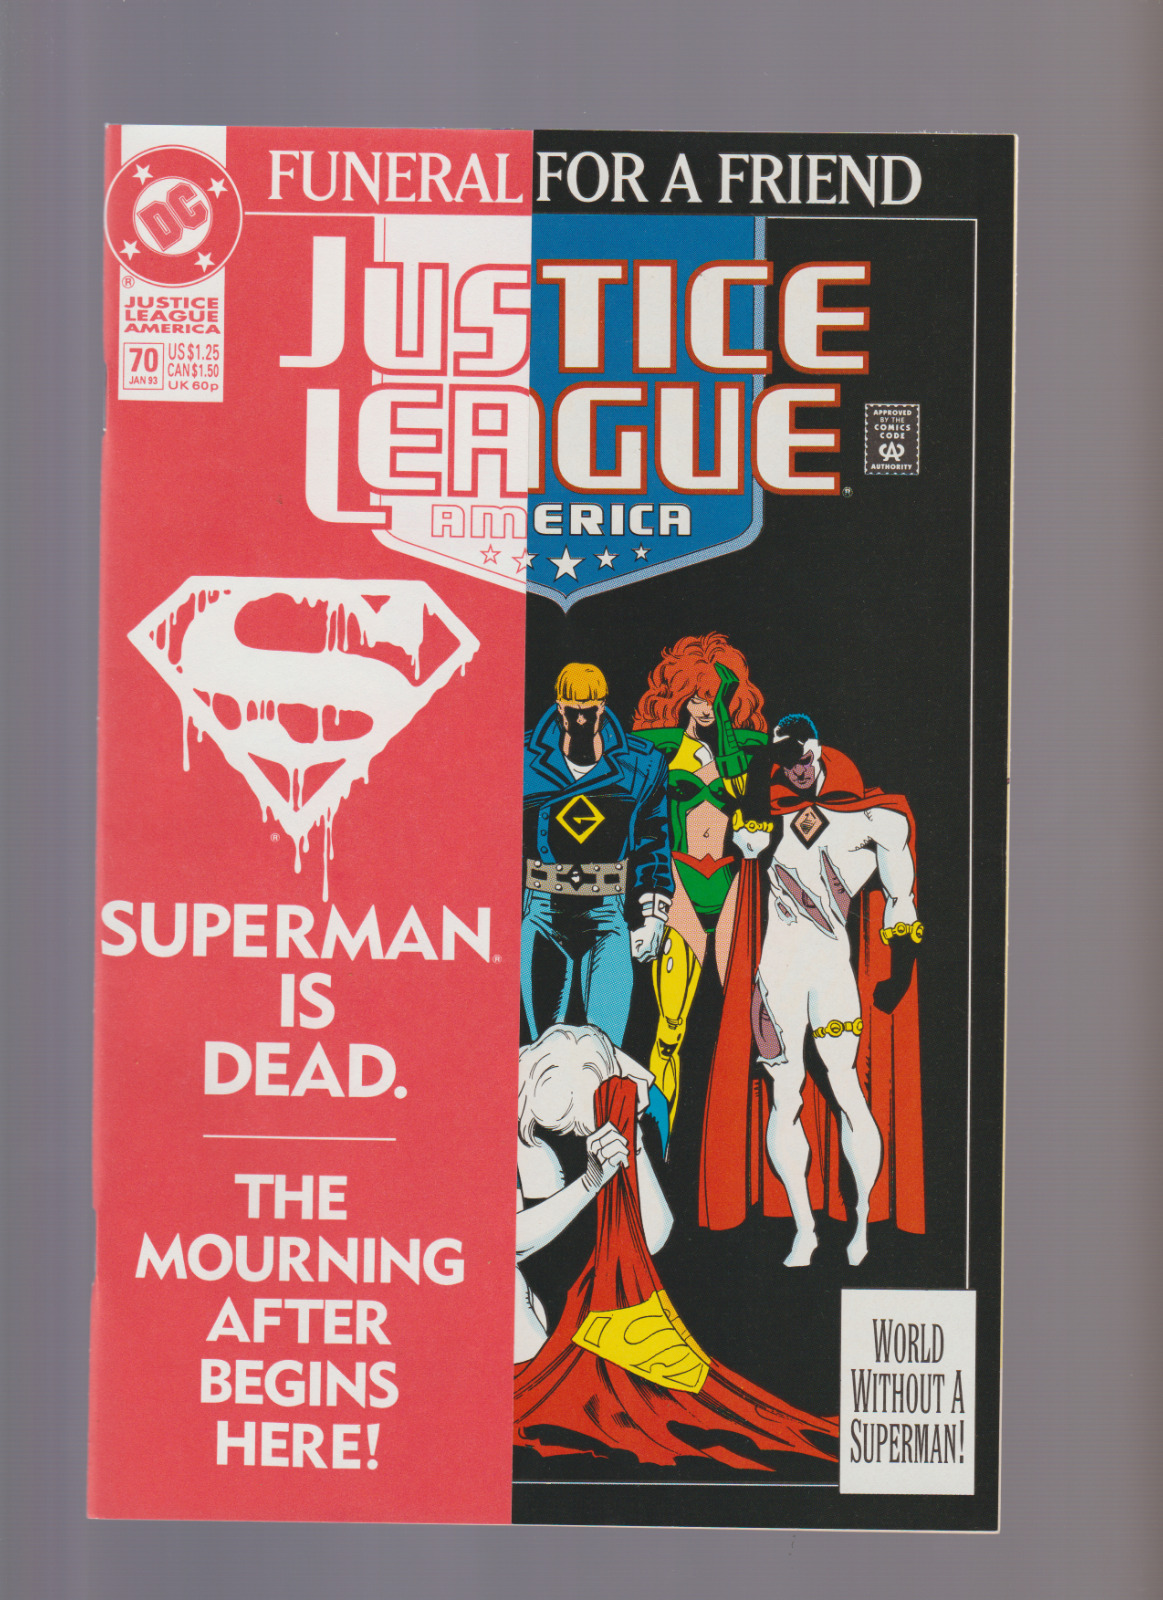 JUSTICE LEAGUE (1993 ) #70 SUPERMAN FUNERAL FOR A FRIEND RED COVER JACKET